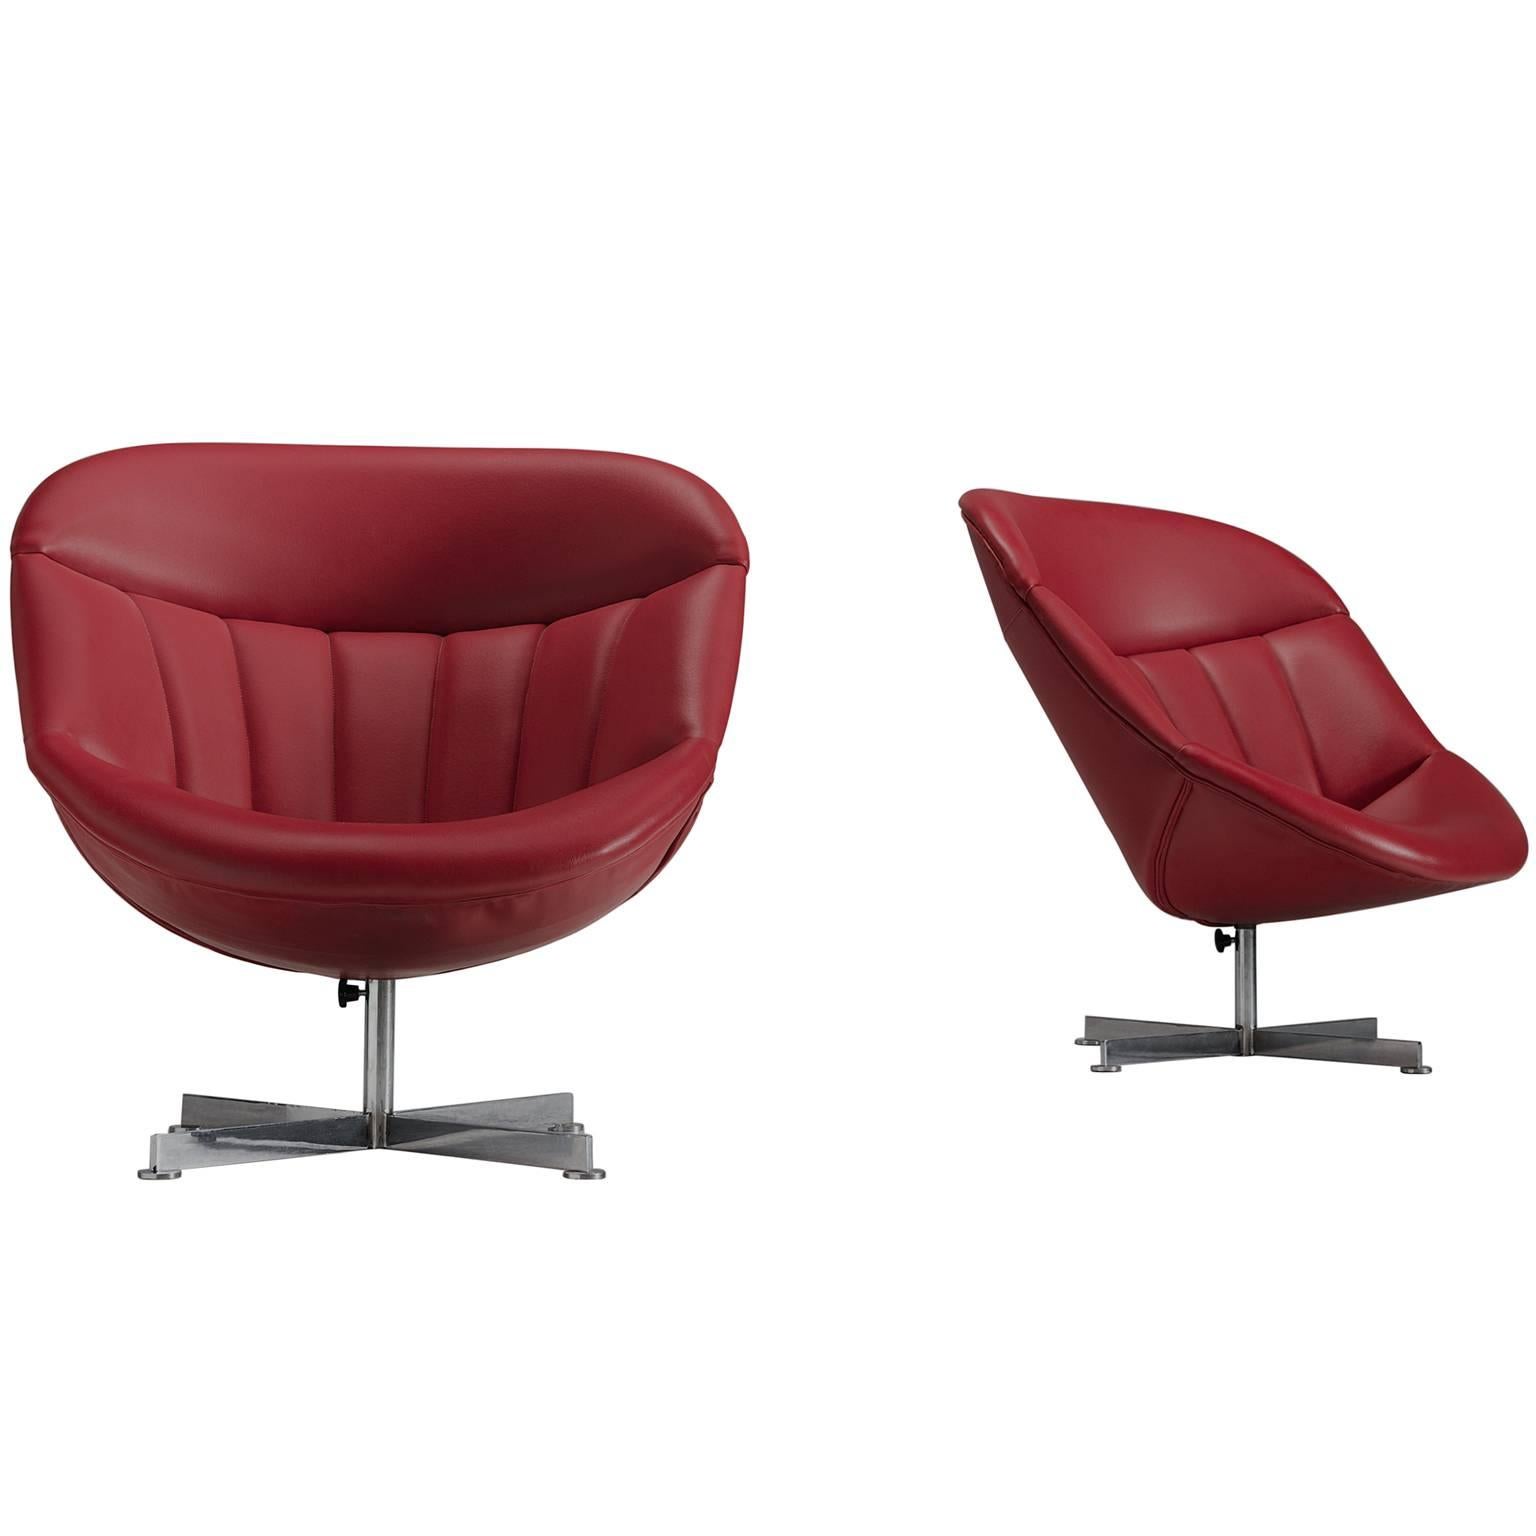 Rudolf Wolf 'Modello' Swivel Easy Chairs in Red Faux Leather Upholstery